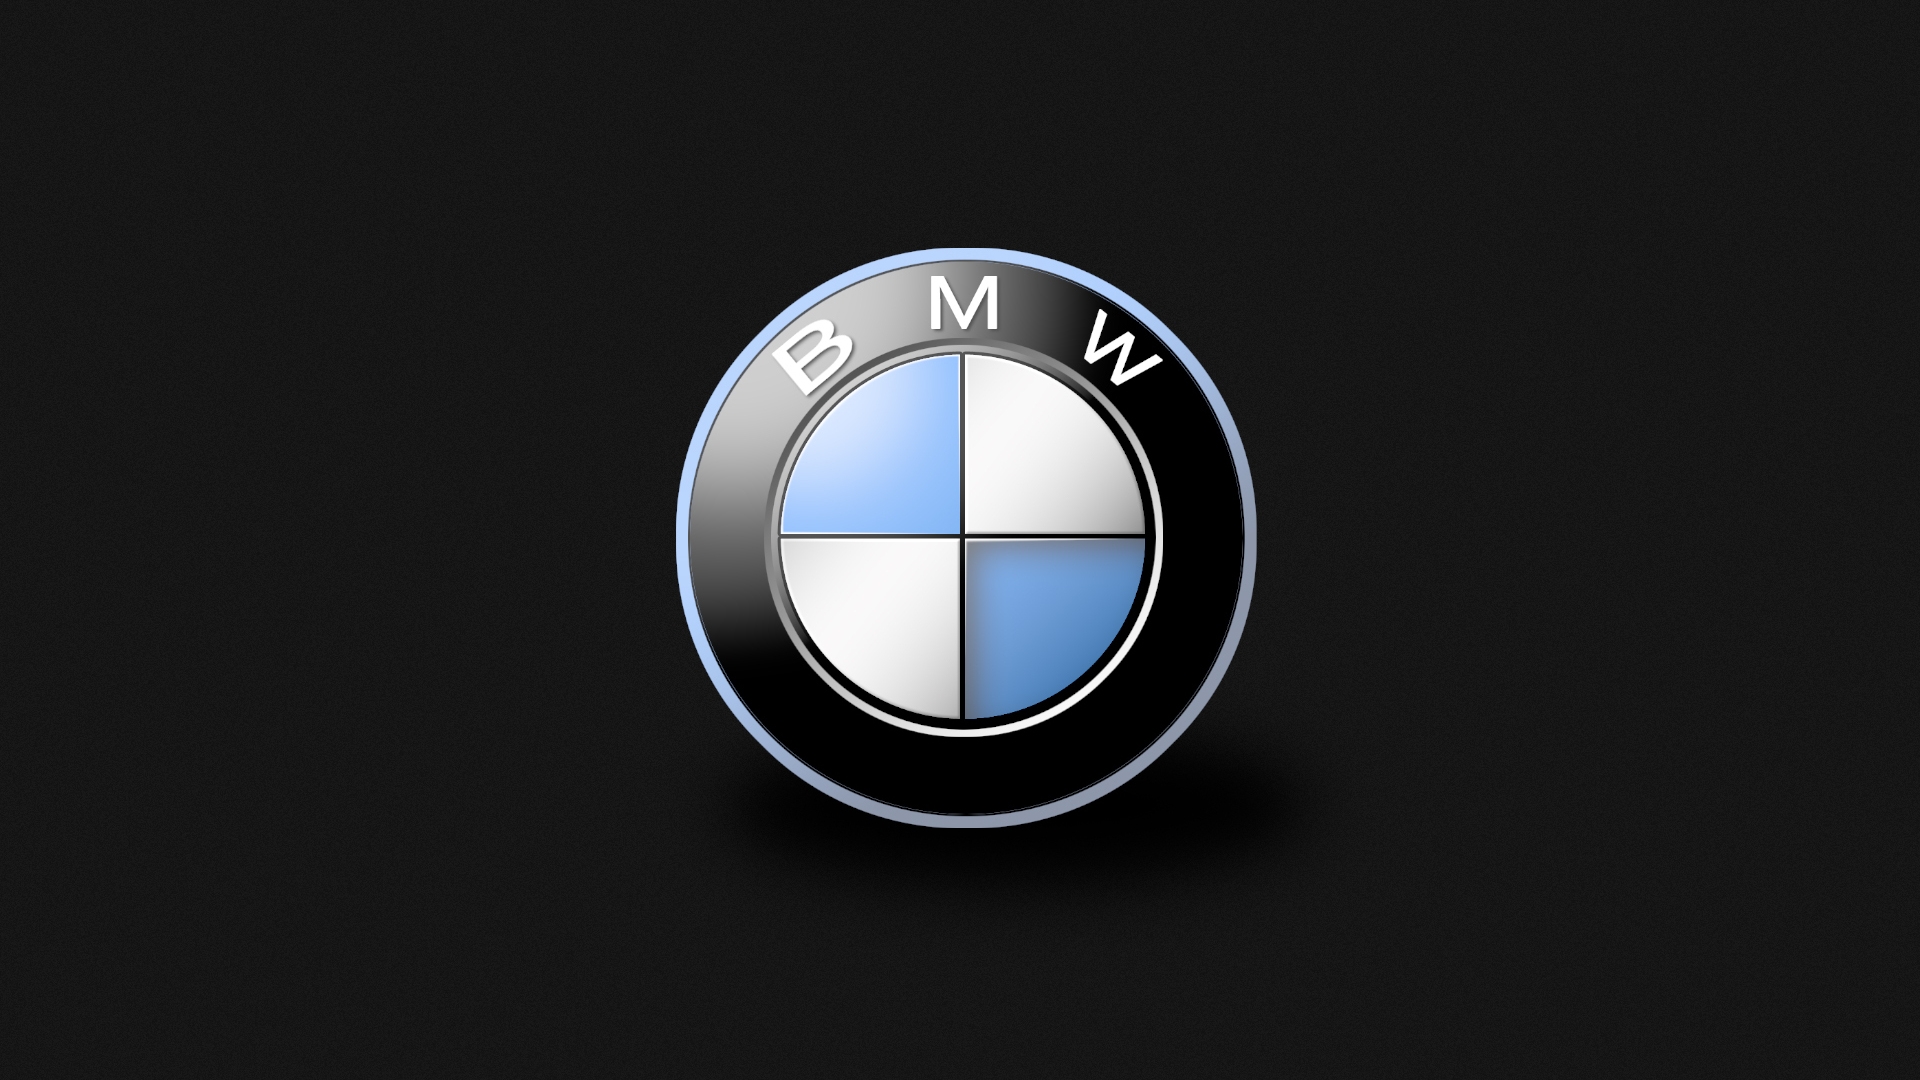 Free download Bmw logo High Definition Wallpapers HD wallpapers [1920x1080]  for your Desktop, Mobile & Tablet | Explore 96+ BMW Logo Wallpapers | Bmw M3  Wallpapers, Bmw M Logo Wallpaper, Bmw E36 Wallpaper